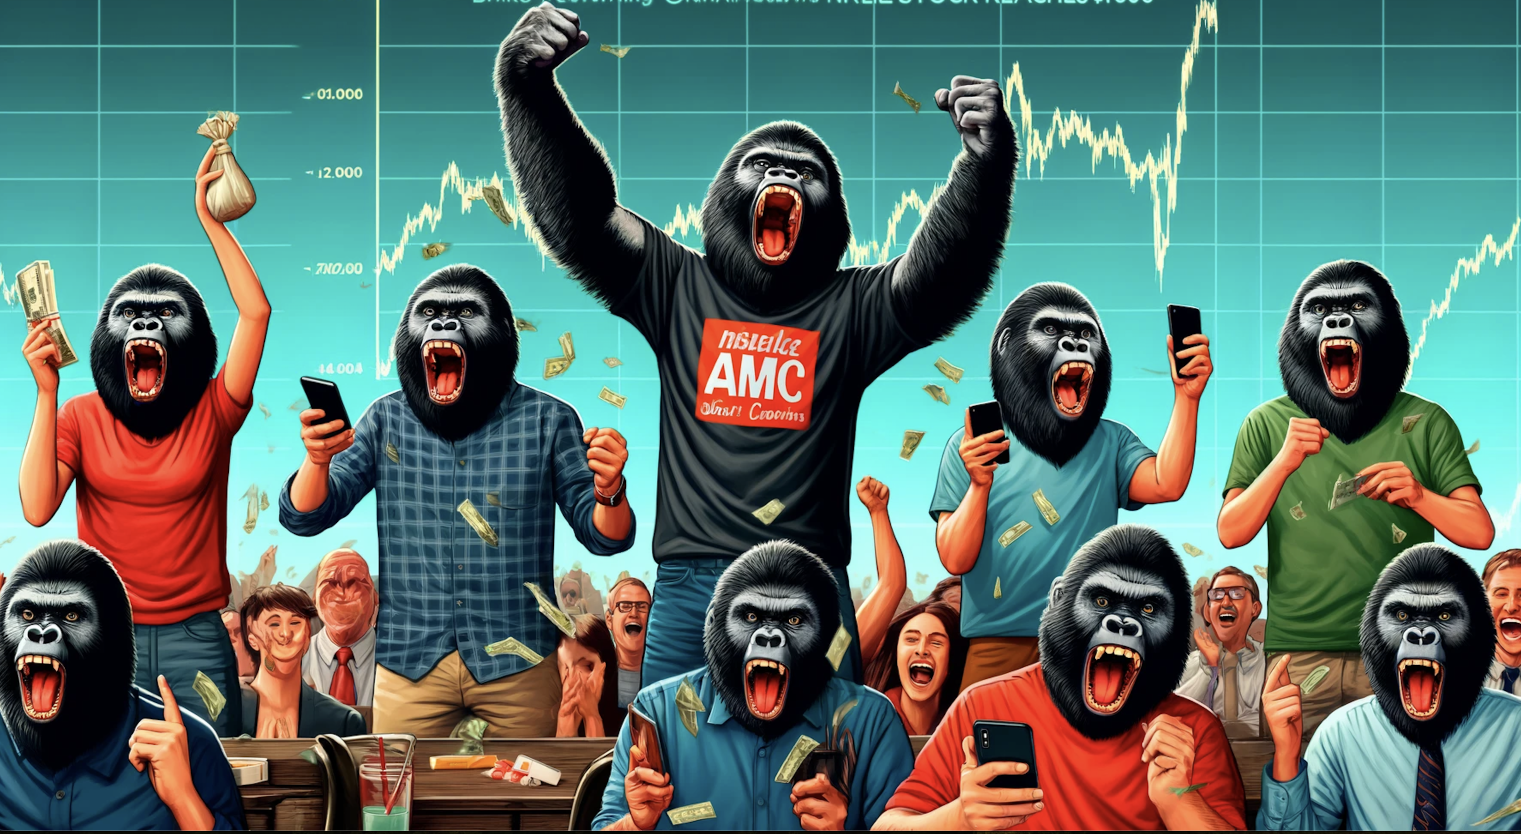 amc to the moon